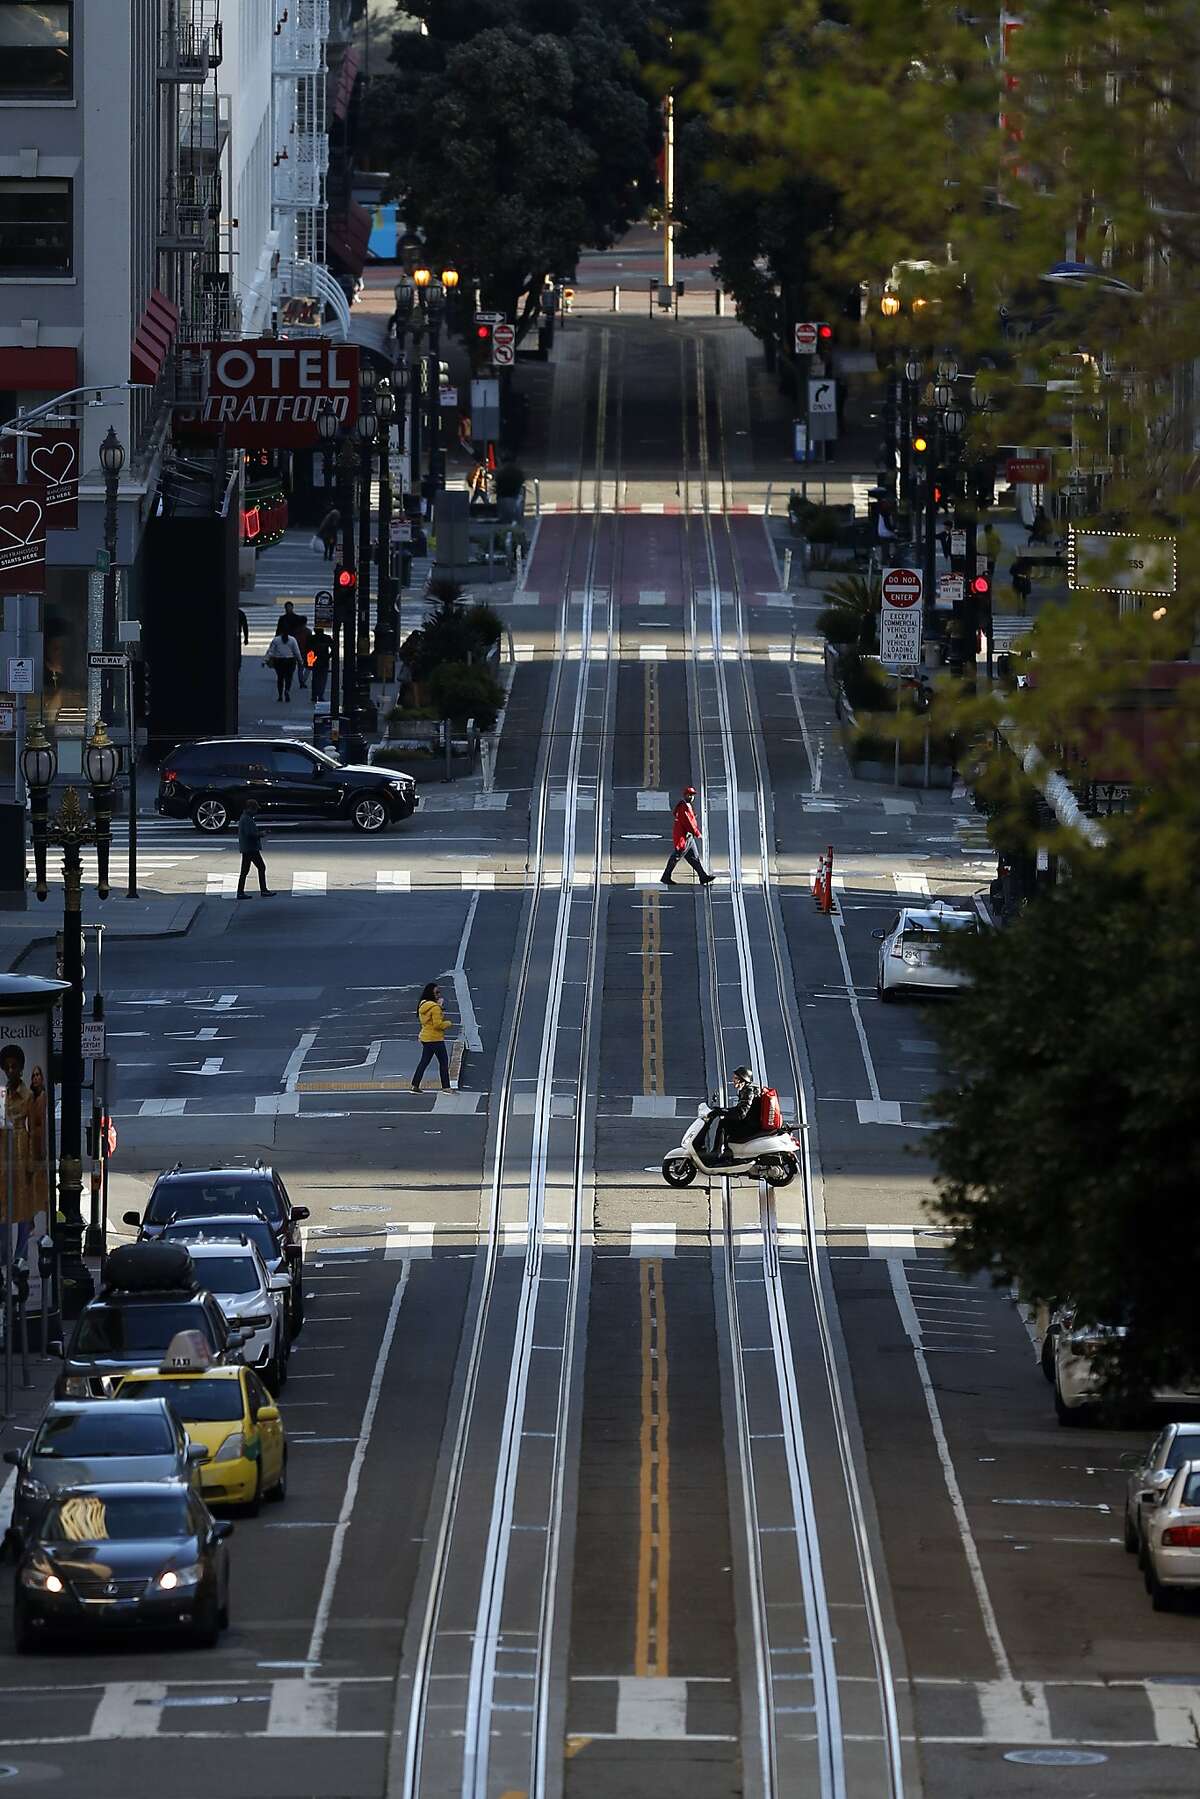 During what normally would be rush hour, vehicular traffic on Powell Street is nearly non-existent during coronavirus shelter in place in San Francisco, Calif., on Thursday, March 19, 2020.